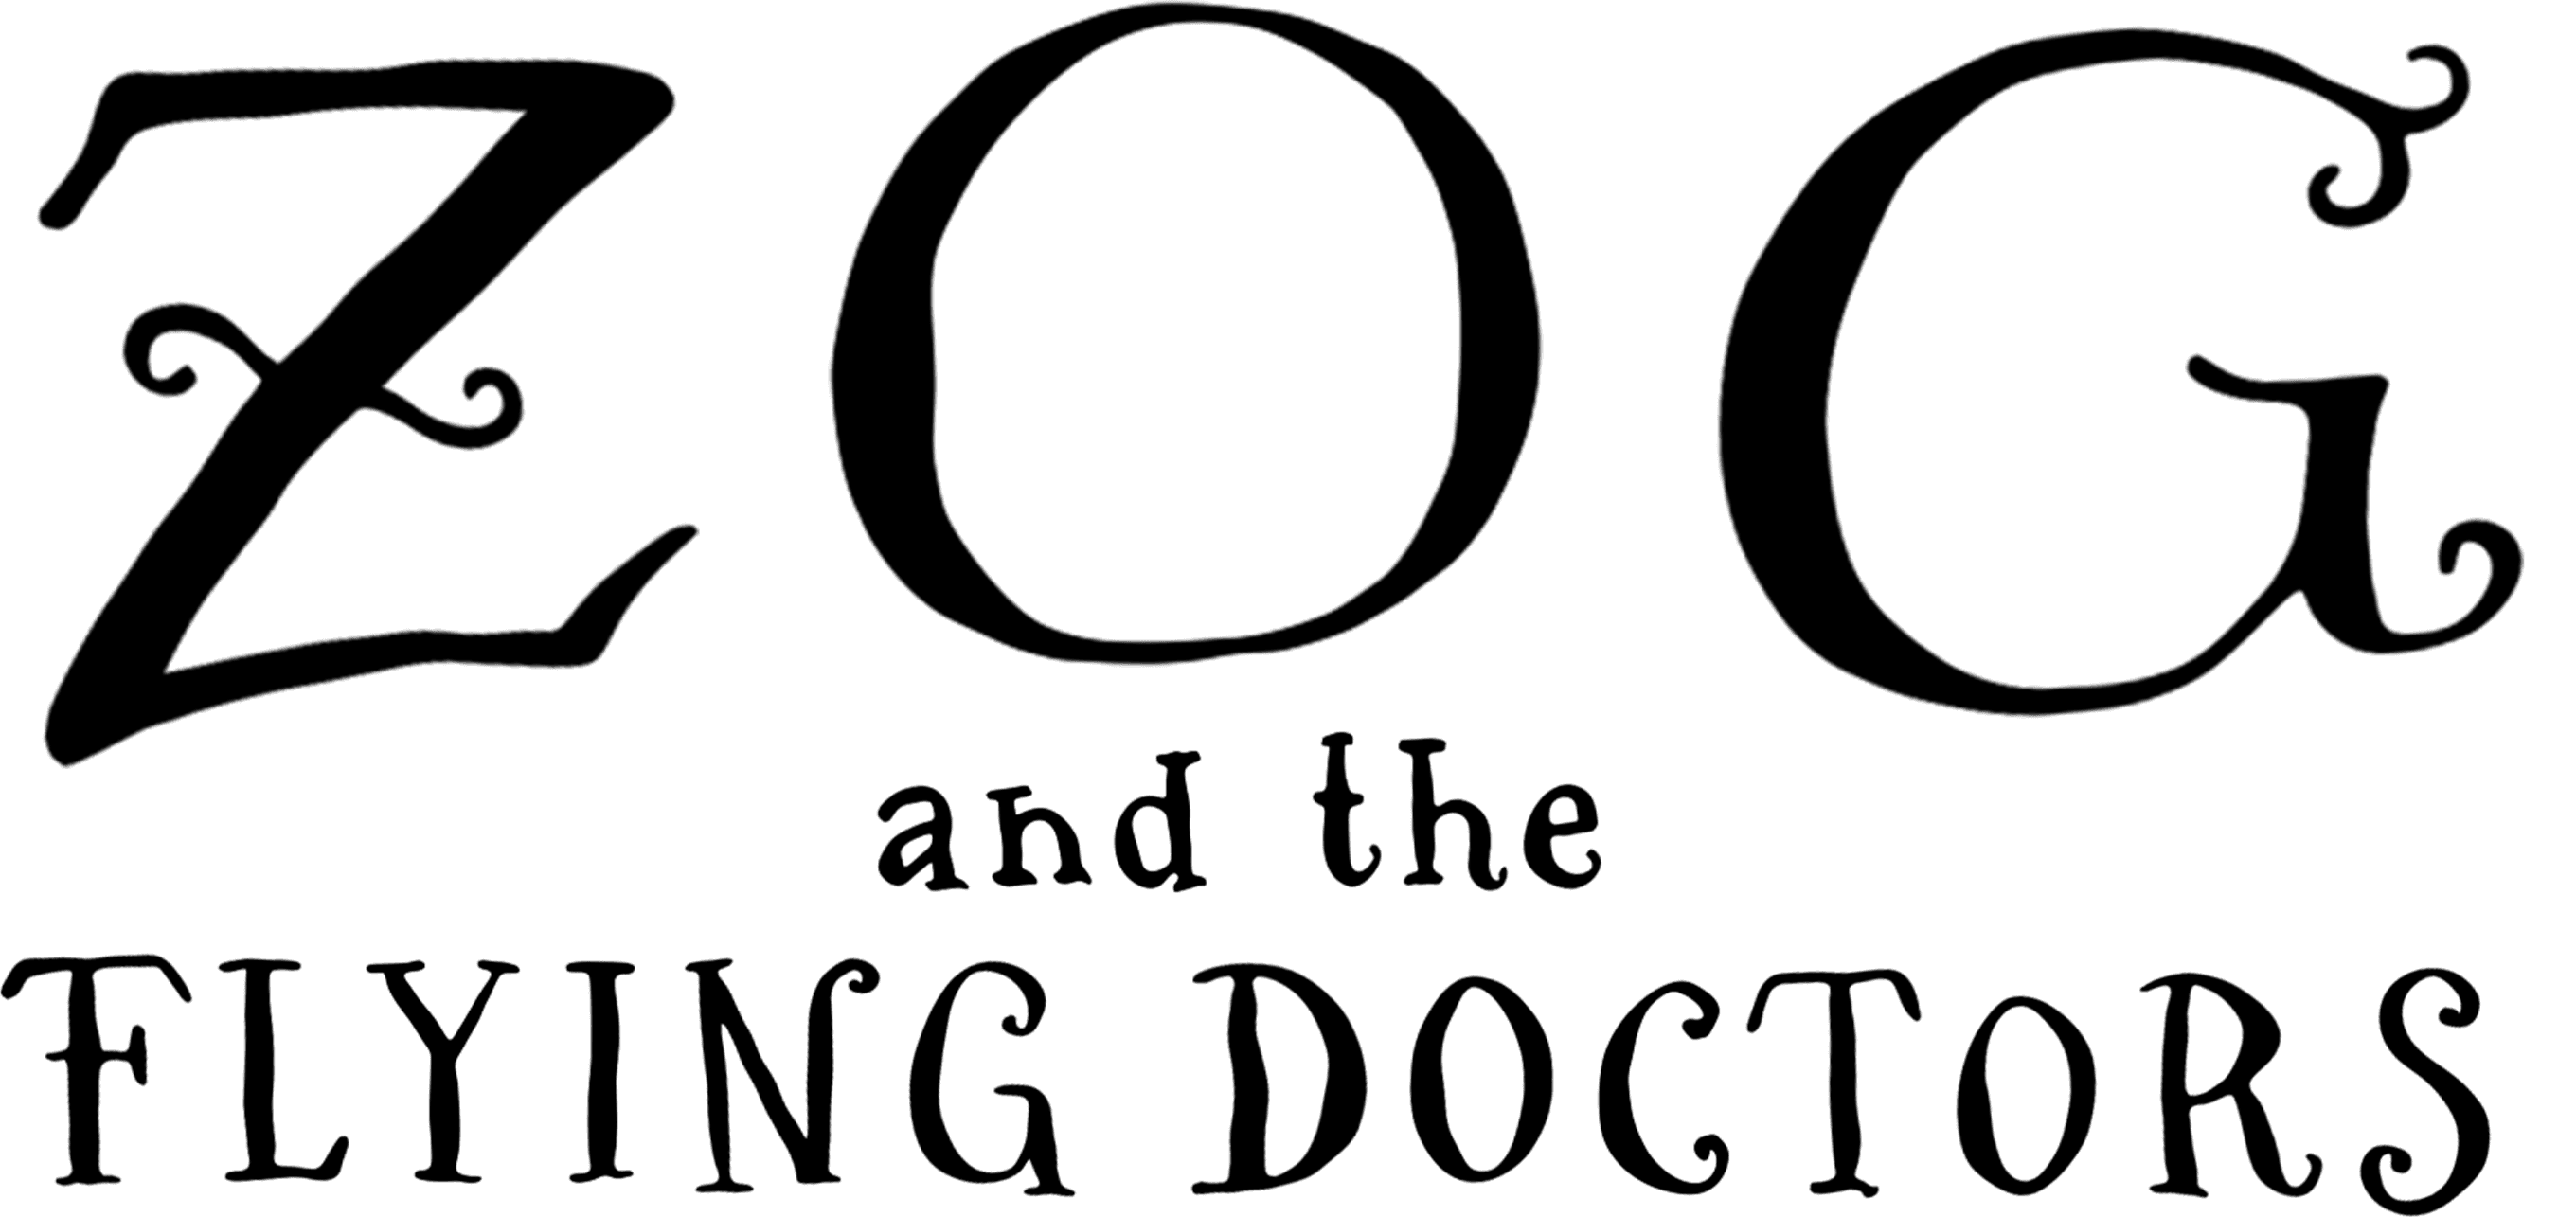 Zog and the Flying Doctors logo